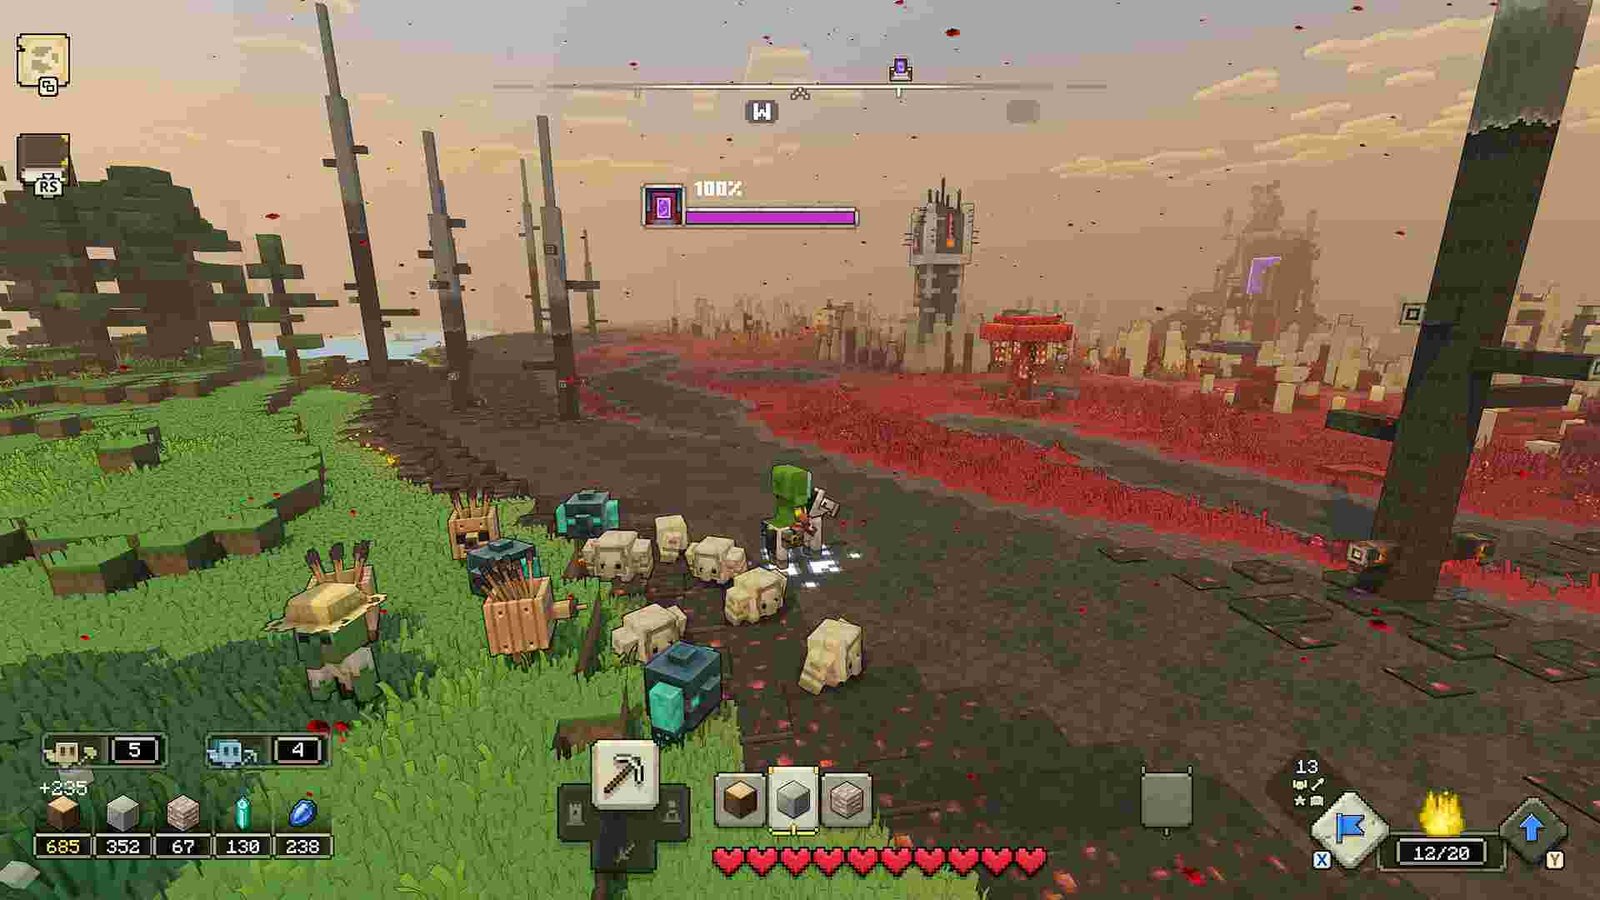 Can You Play Minecraft Legends Offline Without an Internet Connection?